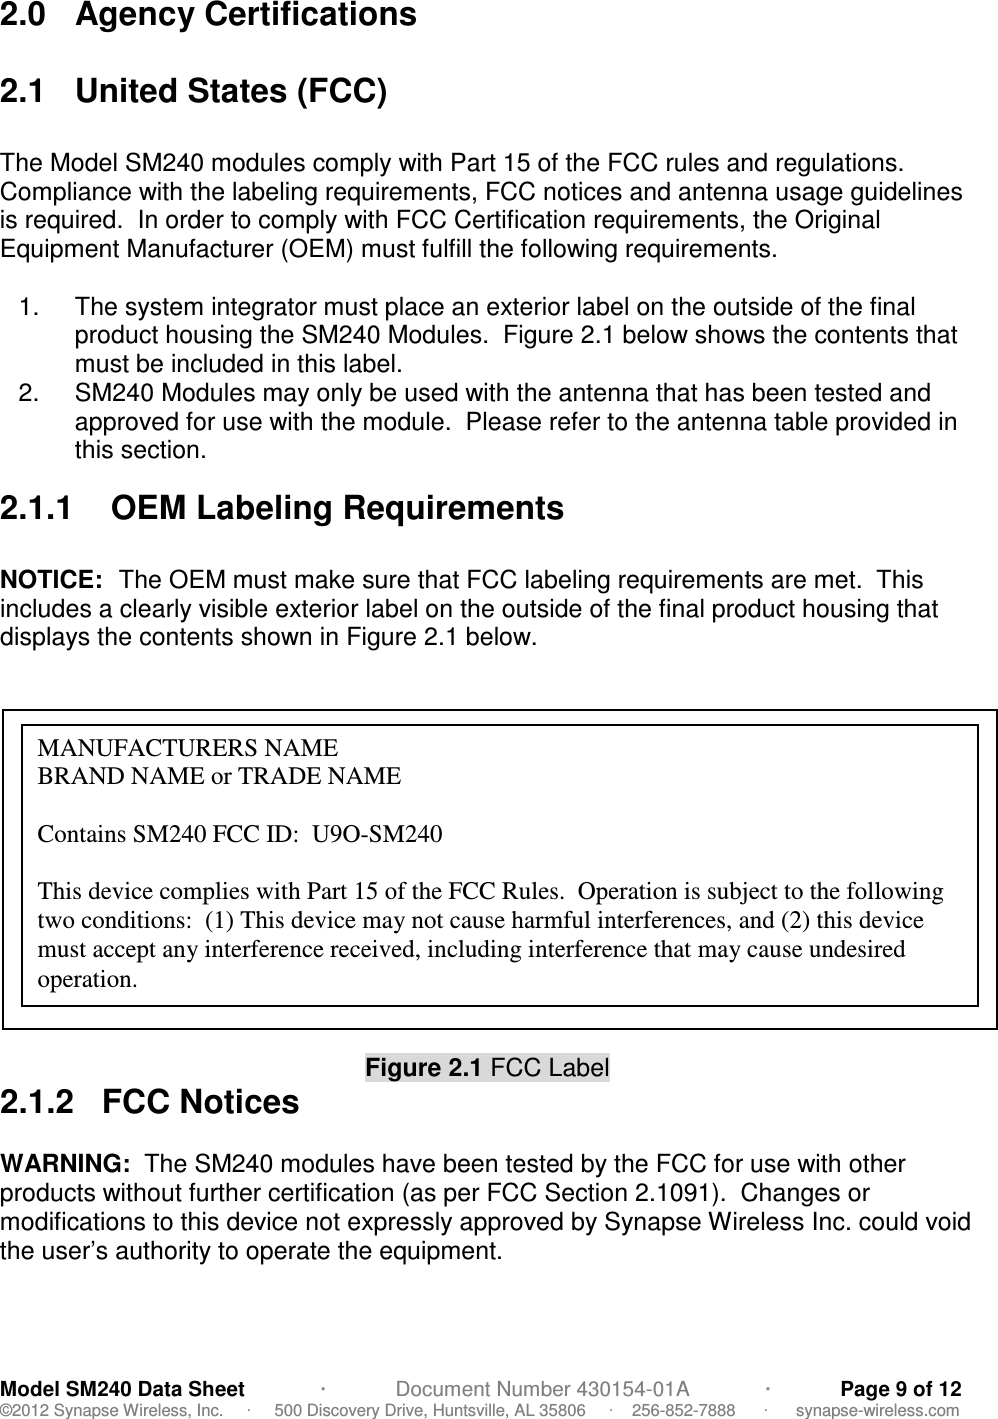                                            Model SM240 Data Sheet             ·            Document Number 430154-01A             ·            Page 9 of 12 ©2012 Synapse Wireless, Inc.     ·     500 Discovery Drive, Huntsville, AL 35806     ·    256-852-7888      ·      synapse-wireless.com 2.0  Agency Certifications  2.1  United States (FCC)  The Model SM240 modules comply with Part 15 of the FCC rules and regulations.  Compliance with the labeling requirements, FCC notices and antenna usage guidelines is required.  In order to comply with FCC Certification requirements, the Original Equipment Manufacturer (OEM) must fulfill the following requirements.  1.  The system integrator must place an exterior label on the outside of the final product housing the SM240 Modules.  Figure 2.1 below shows the contents that must be included in this label. 2.  SM240 Modules may only be used with the antenna that has been tested and approved for use with the module.  Please refer to the antenna table provided in this section.  2.1.1    OEM Labeling Requirements  NOTICE:  The OEM must make sure that FCC labeling requirements are met.  This includes a clearly visible exterior label on the outside of the final product housing that displays the contents shown in Figure 2.1 below.            Figure 2.1 FCC Label 2.1.2   FCC Notices  WARNING:  The SM240 modules have been tested by the FCC for use with other products without further certification (as per FCC Section 2.1091).  Changes or modifications to this device not expressly approved by Synapse Wireless Inc. could void the user’s authority to operate the equipment.  MANUFACTURERS NAME                                                            BRAND NAME or TRADE NAME  Contains SM240 FCC ID:  U9O-SM240  This device complies with Part 15 of the FCC Rules.  Operation is subject to the following two conditions:  (1) This device may not cause harmful interferences, and (2) this device must accept any interference received, including interference that may cause undesired operation. 